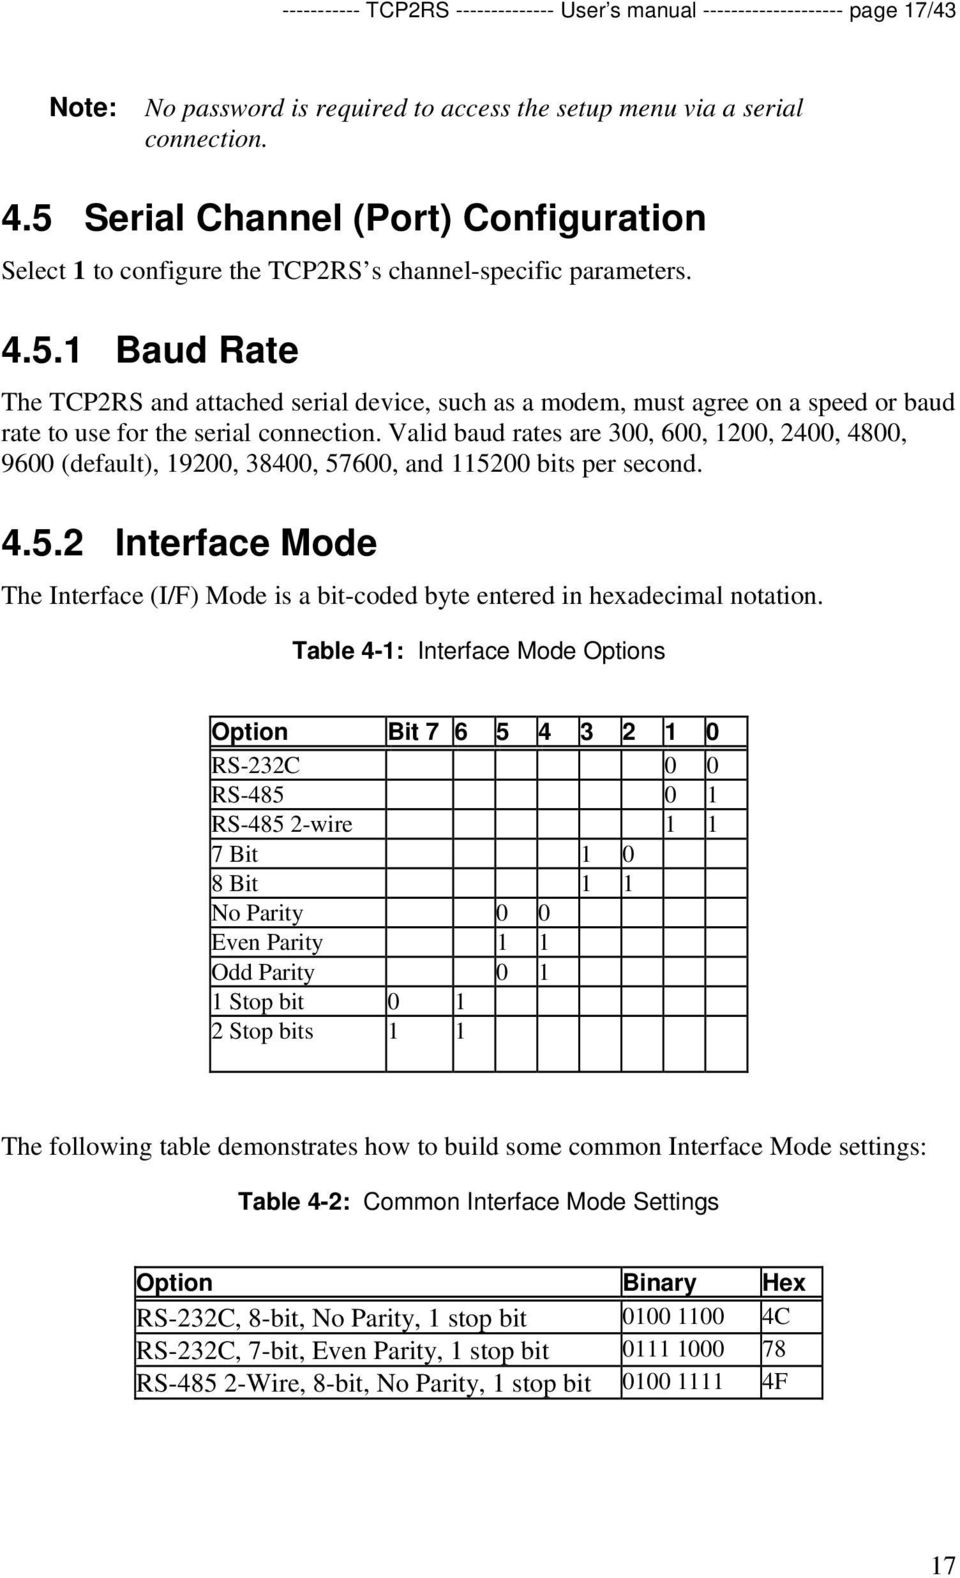 Valid baud rates are 300, 600, 1200, 2400, 4800, 9600 (default), 19200, 38400, 57600, and 115200 bits per second. 4.5.2 Interface Mode The Interface (I/F) Mode is a bit-coded byte entered in hexadecimal notation.